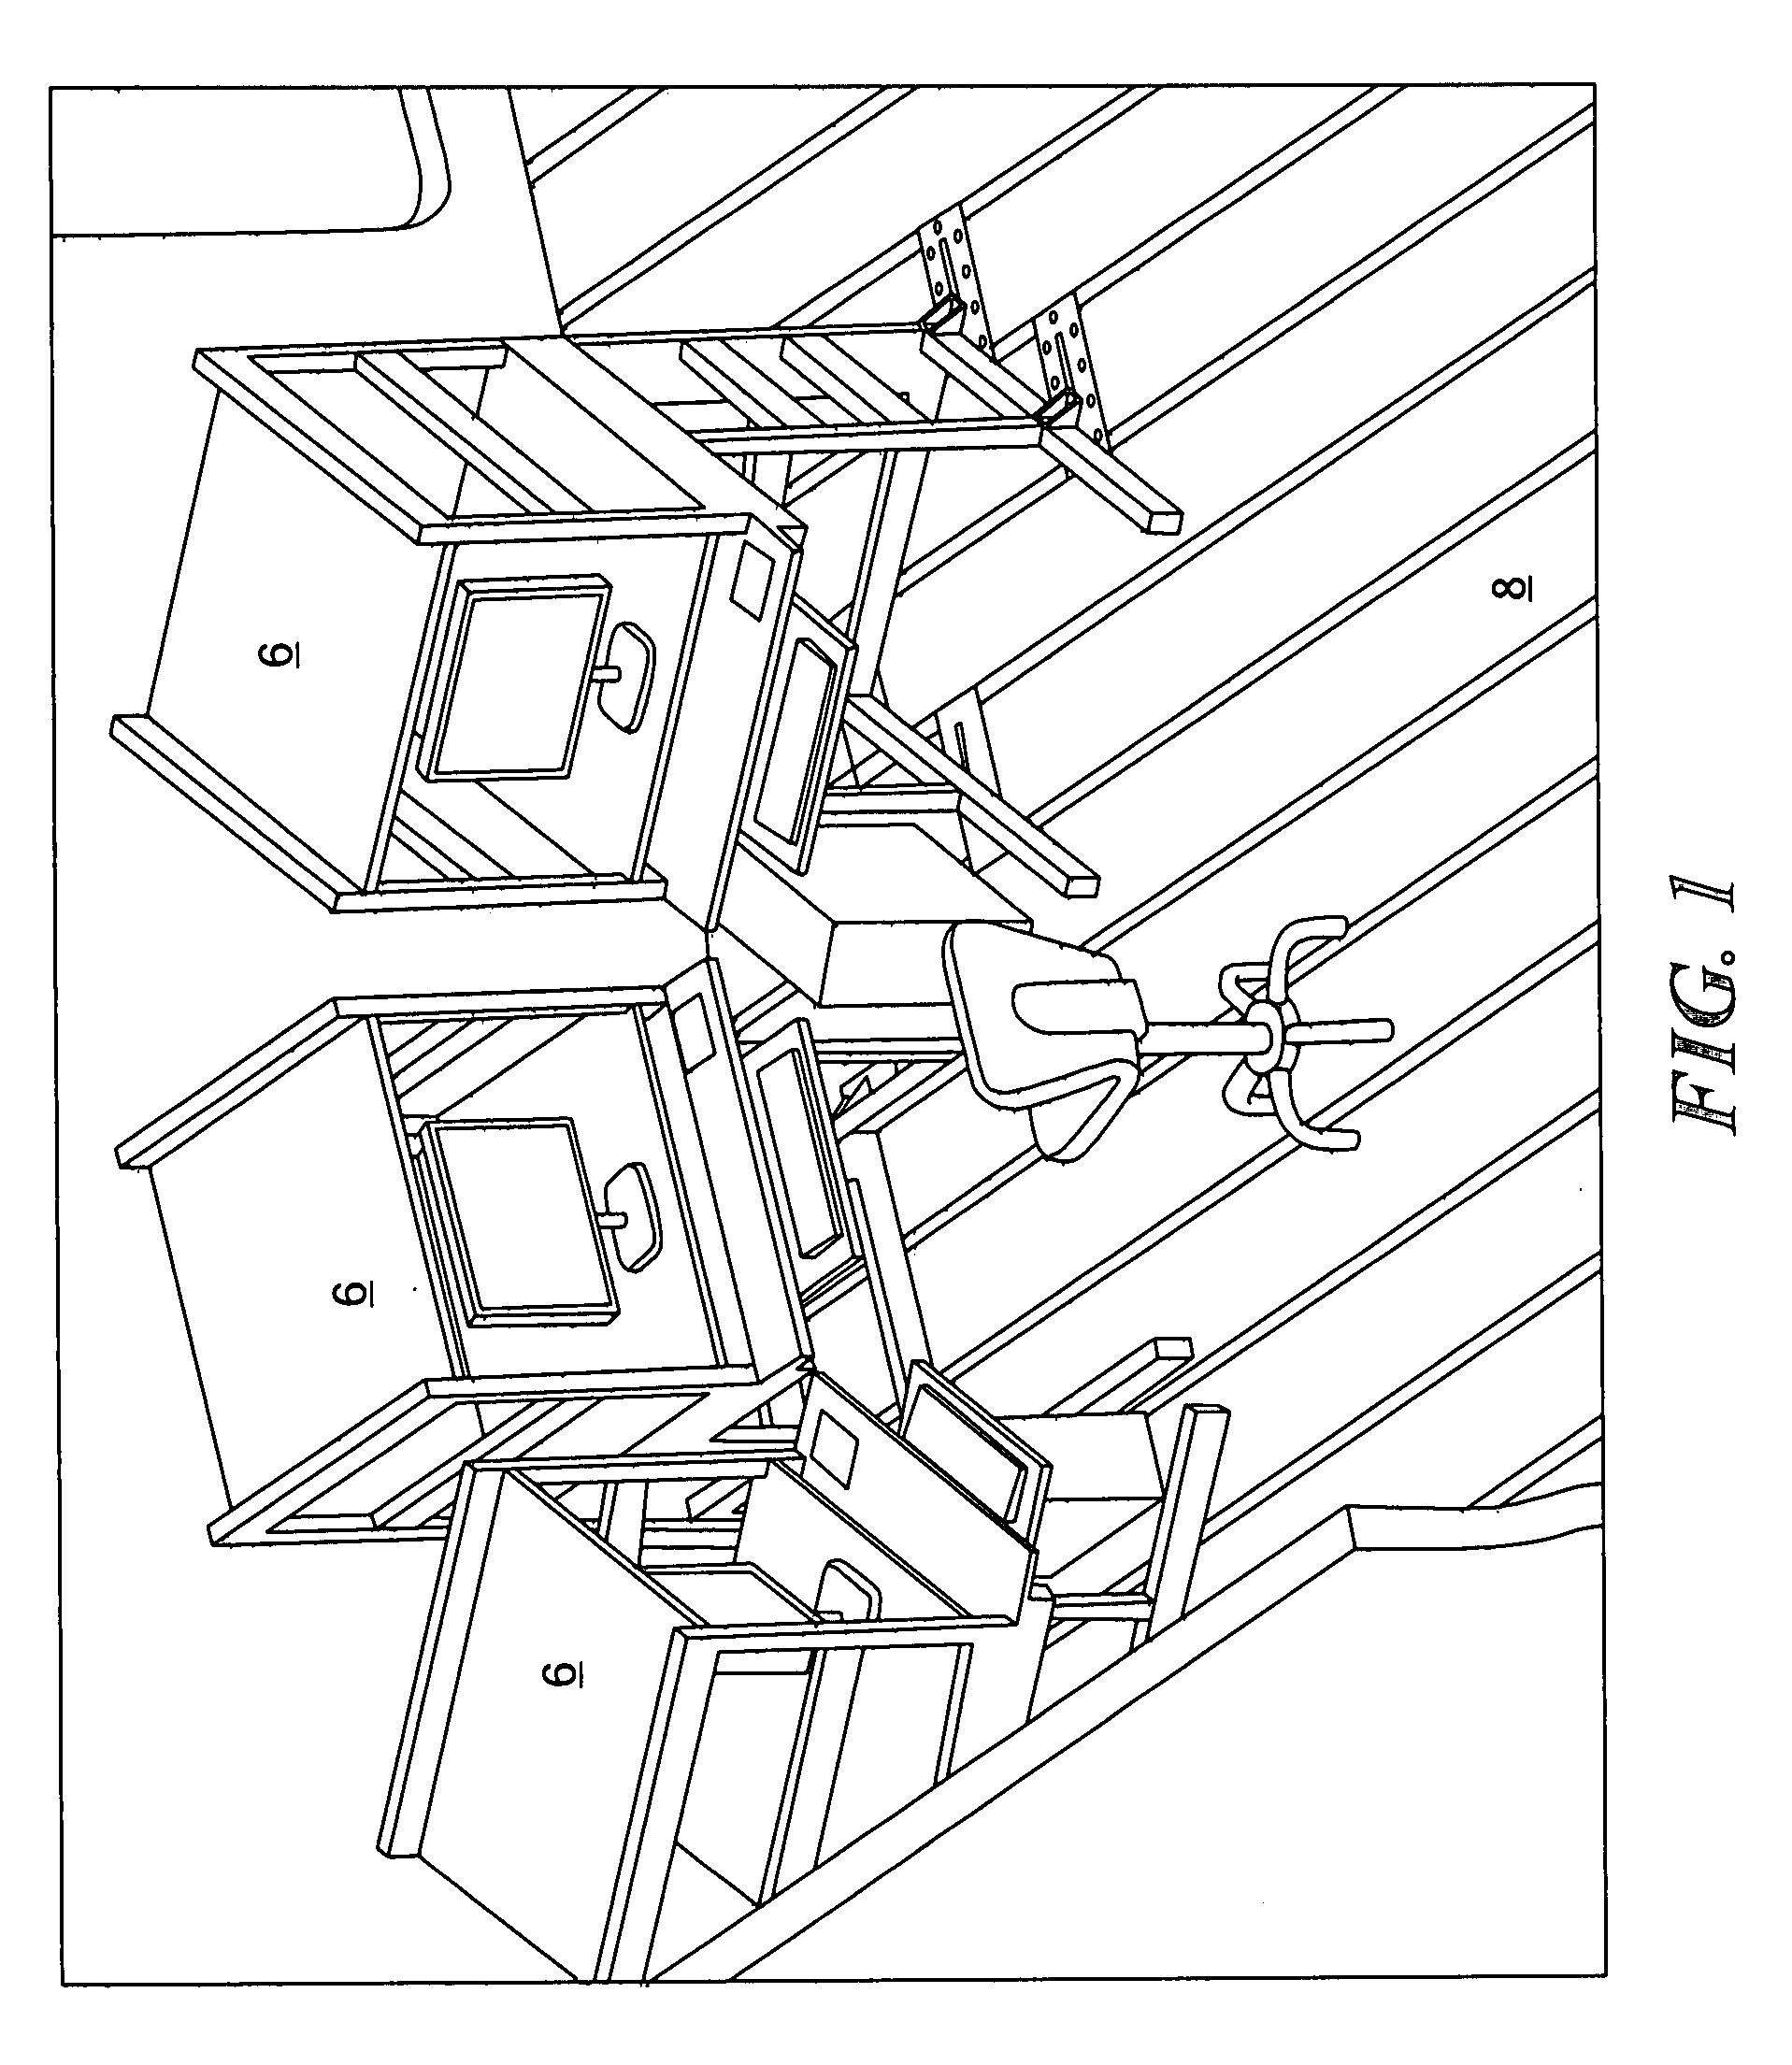 Foundation adapter module and deck tile system